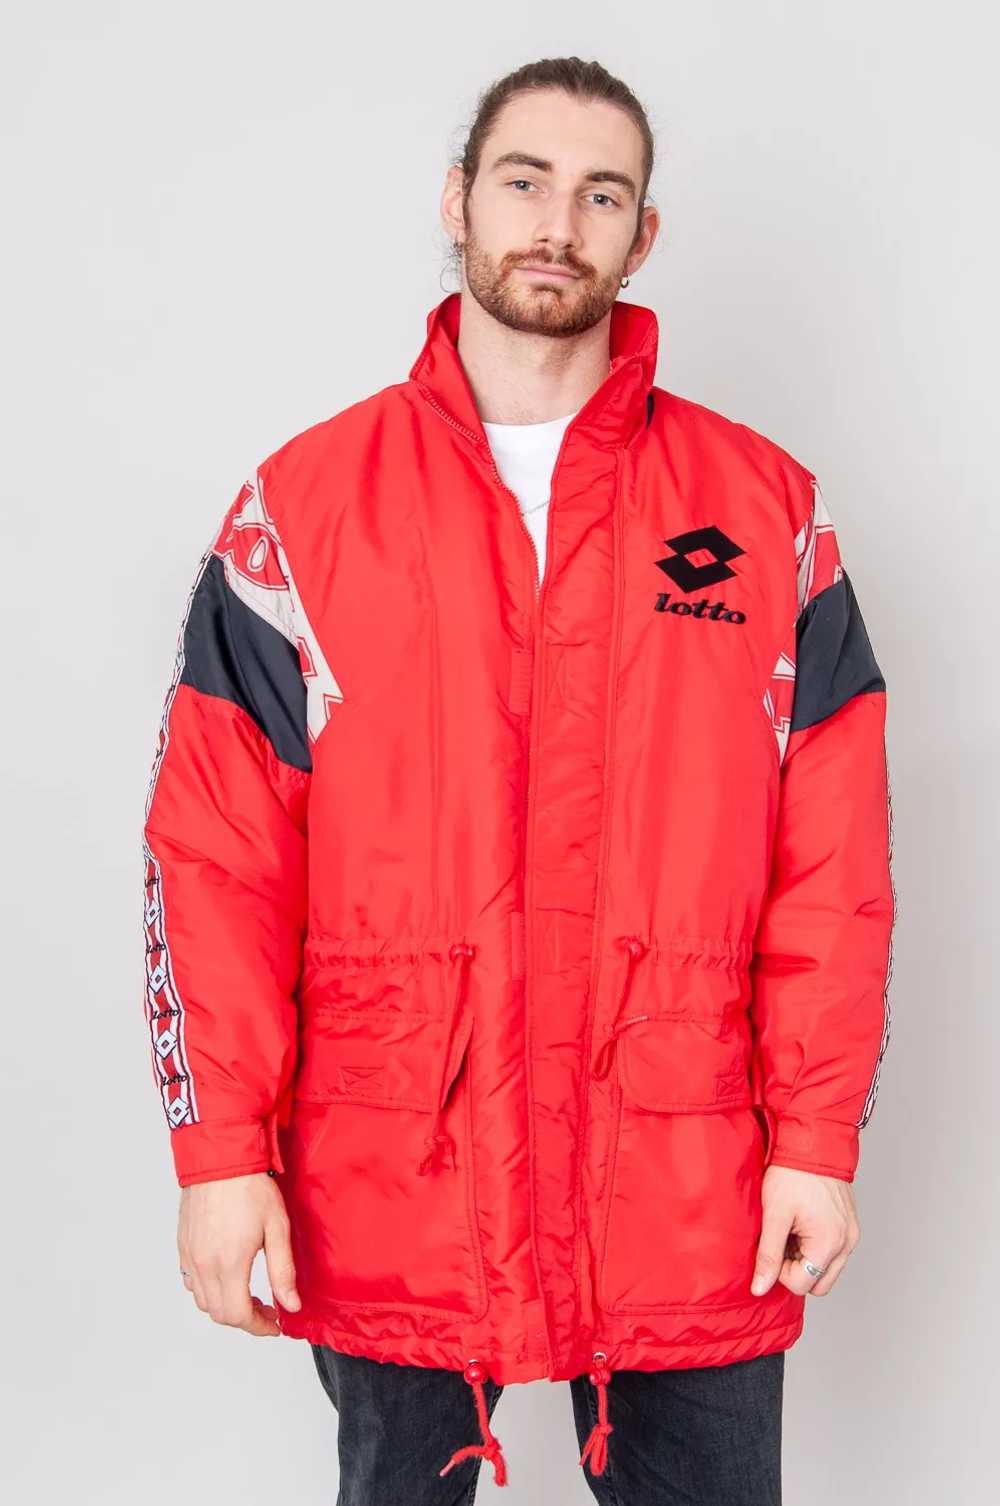 Lotto buffer coat Red with embroidered logo - image 2